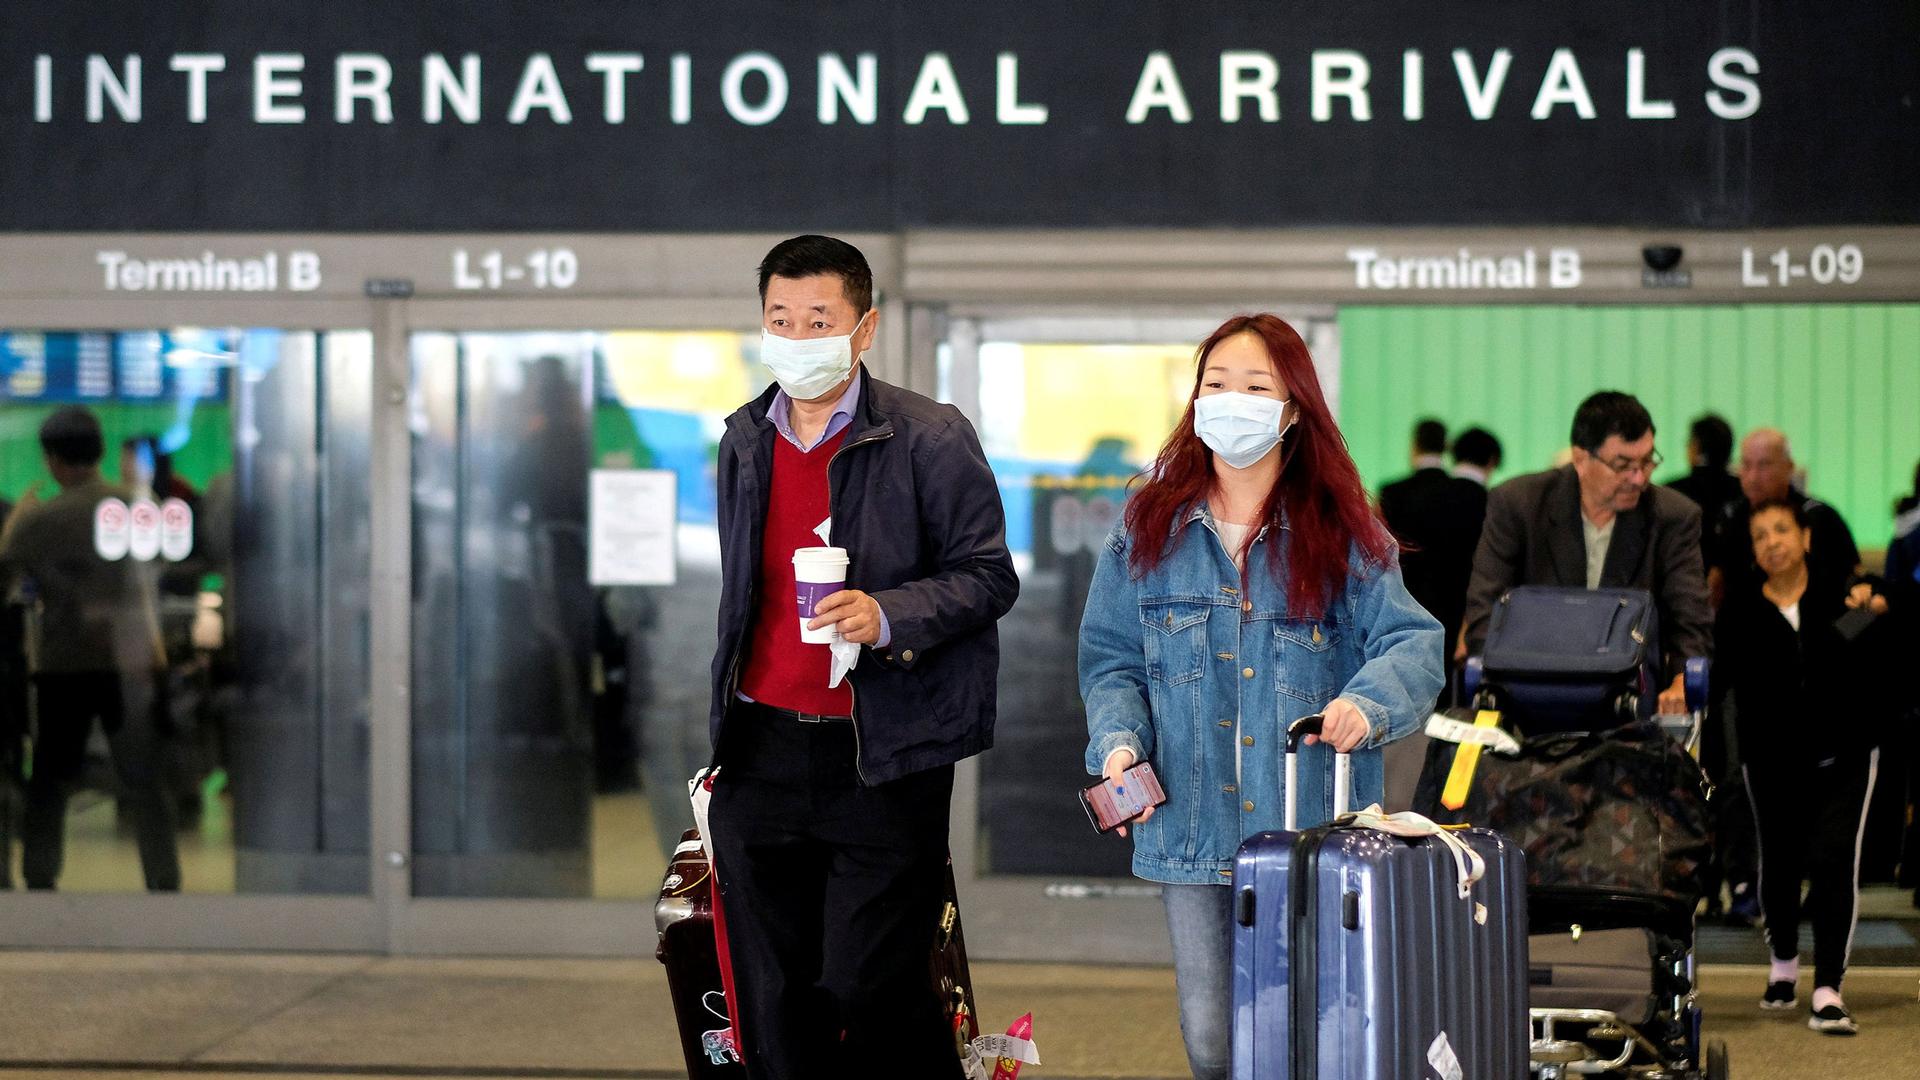 A man and a woman are shown with suitcases and wearing face masks while leaving the international arrivals terminal at Los Angeles International Airport.